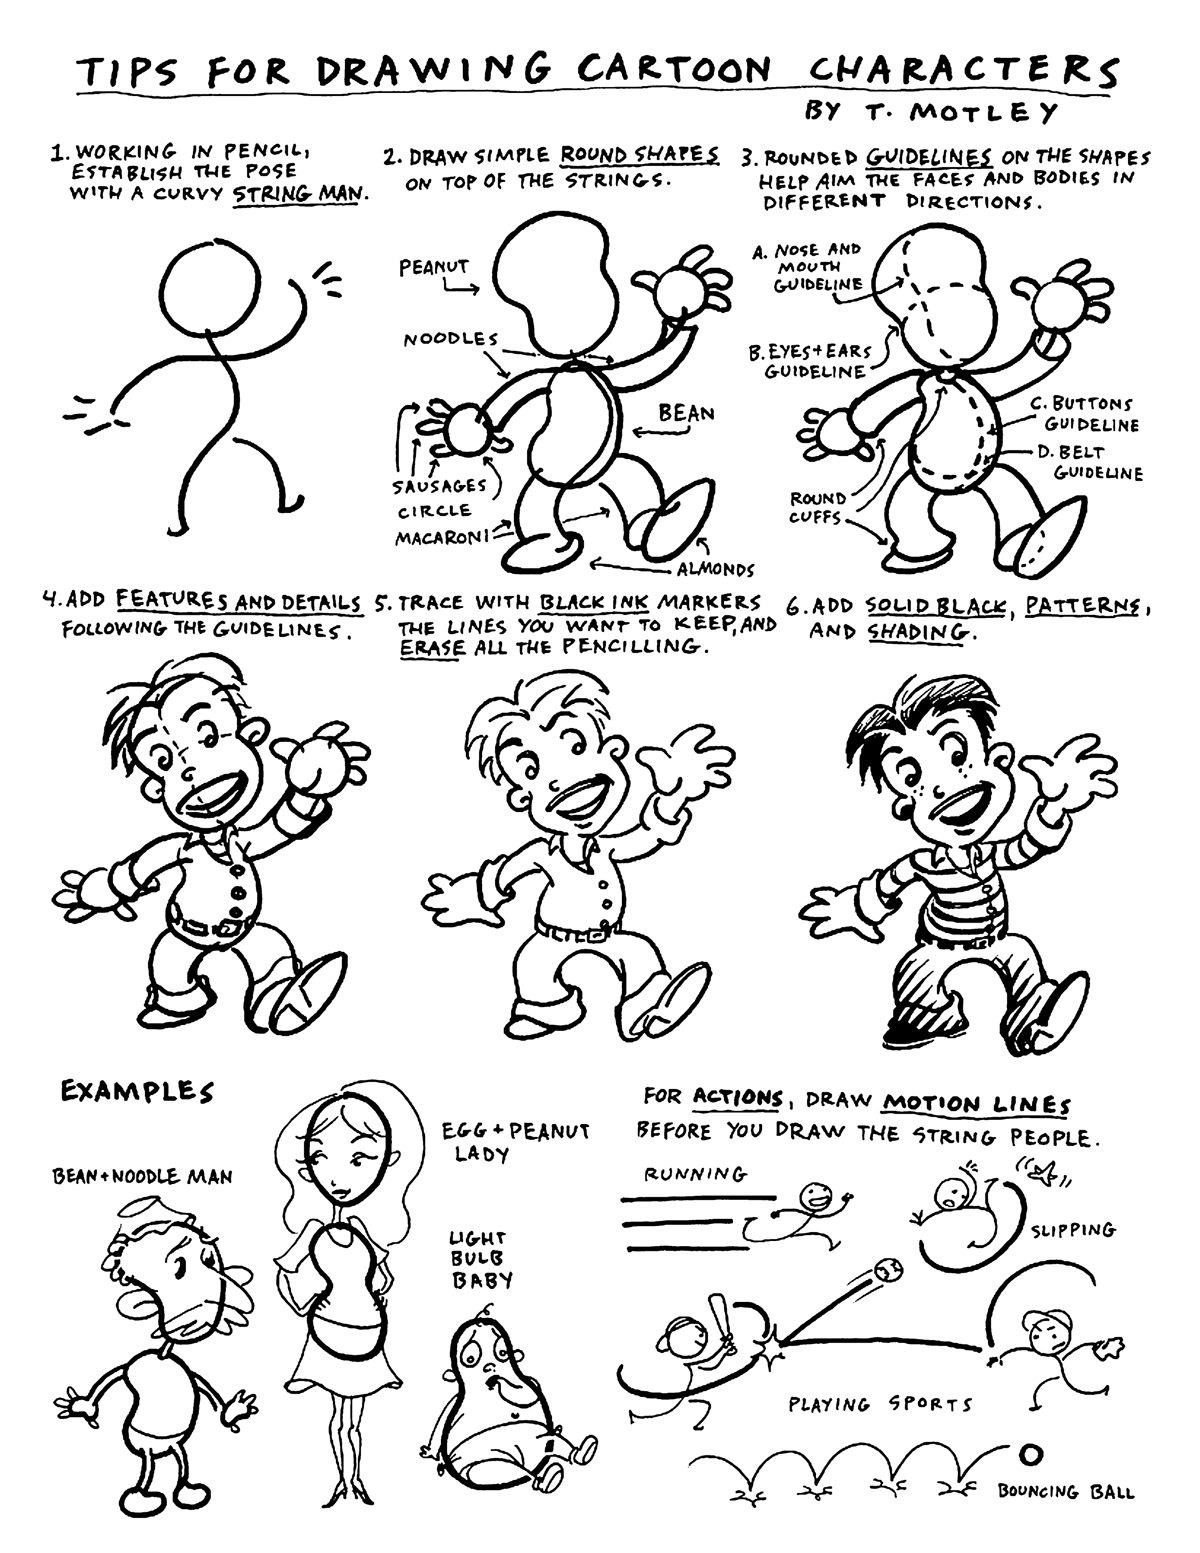 Tips for Drawing Characters